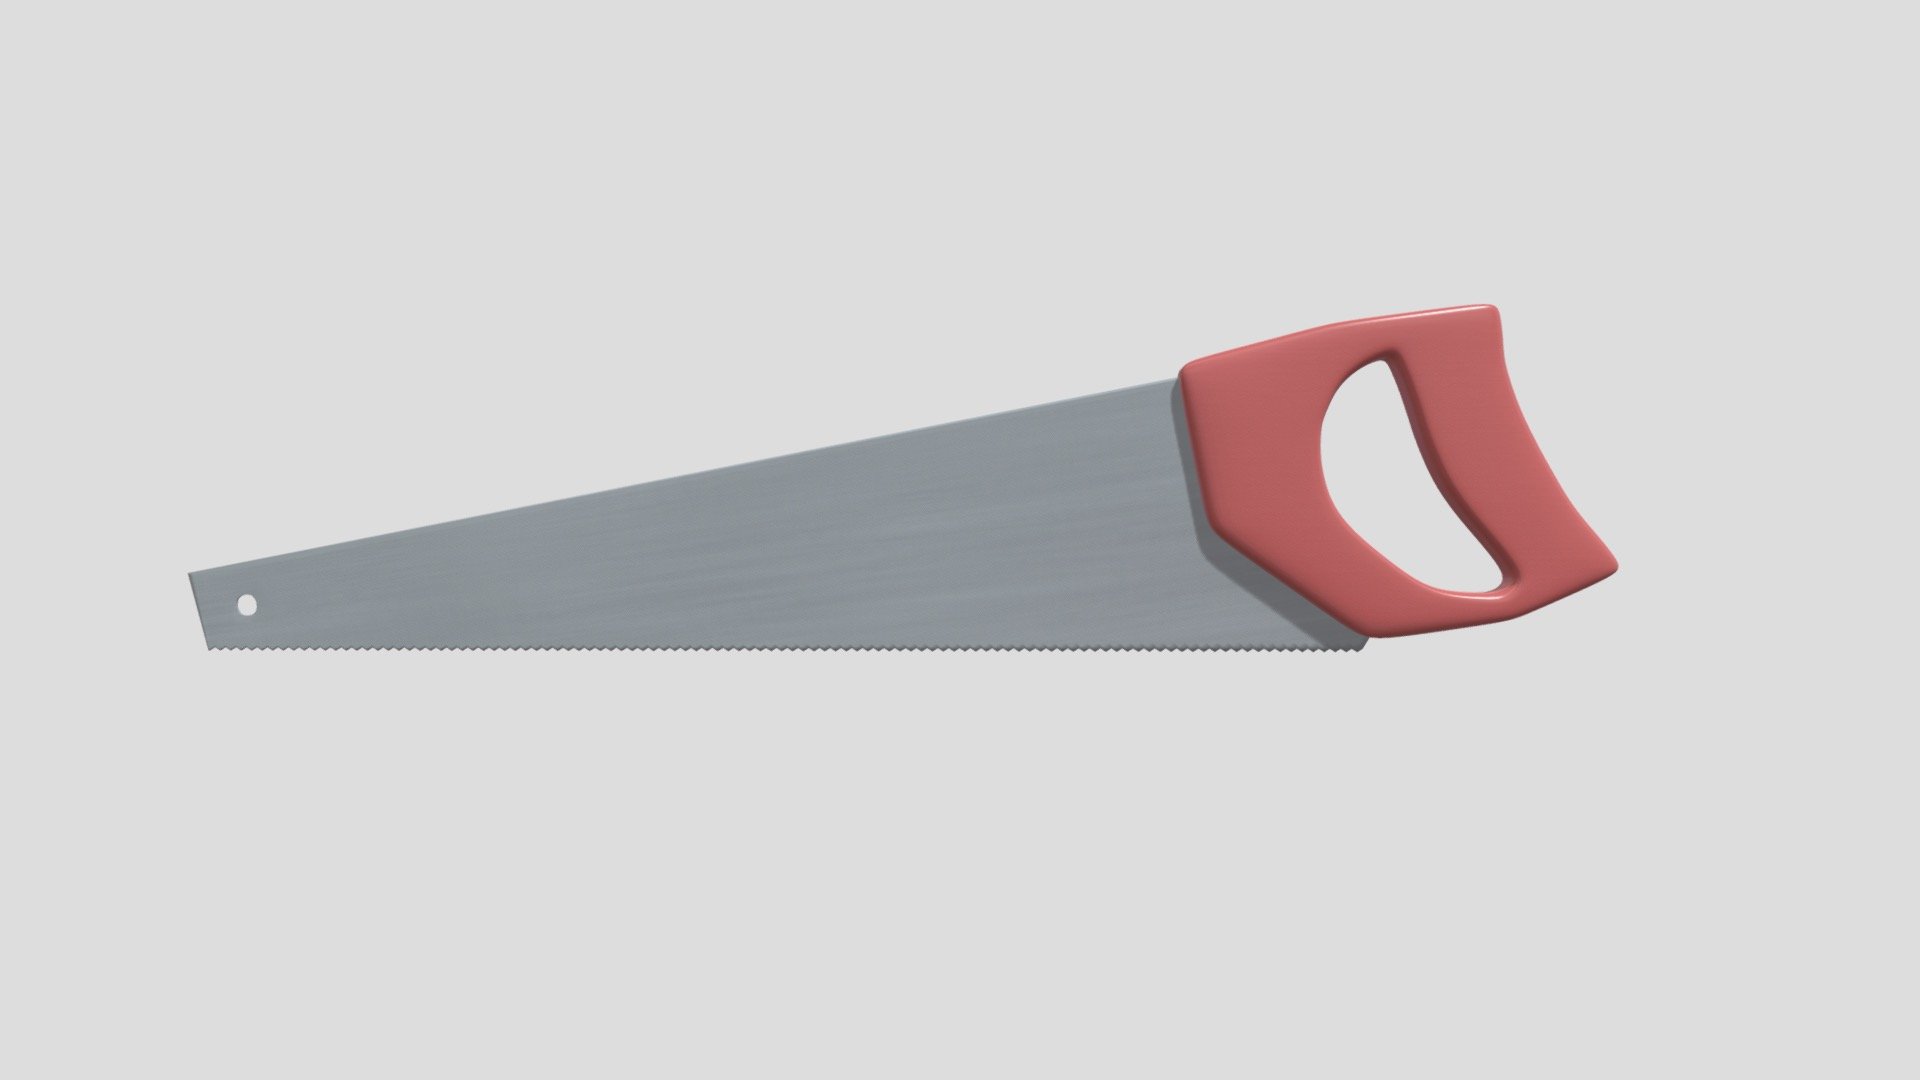 Subdivision Level: 2

Mirrored.

Textures: 1024 x 1024, Two colors on texture: Red, Metallic grey textures.

Materials: 2 - Metal, Handle.

Formats: .stl .obj .fbx .dae .x3d

Origin located on handle-center

Polygons: 42392

Vertices: 20974

I hope you enjoy the model! - Saw - Buy Royalty Free 3D model by Ed+ (@EDplus) 3d model